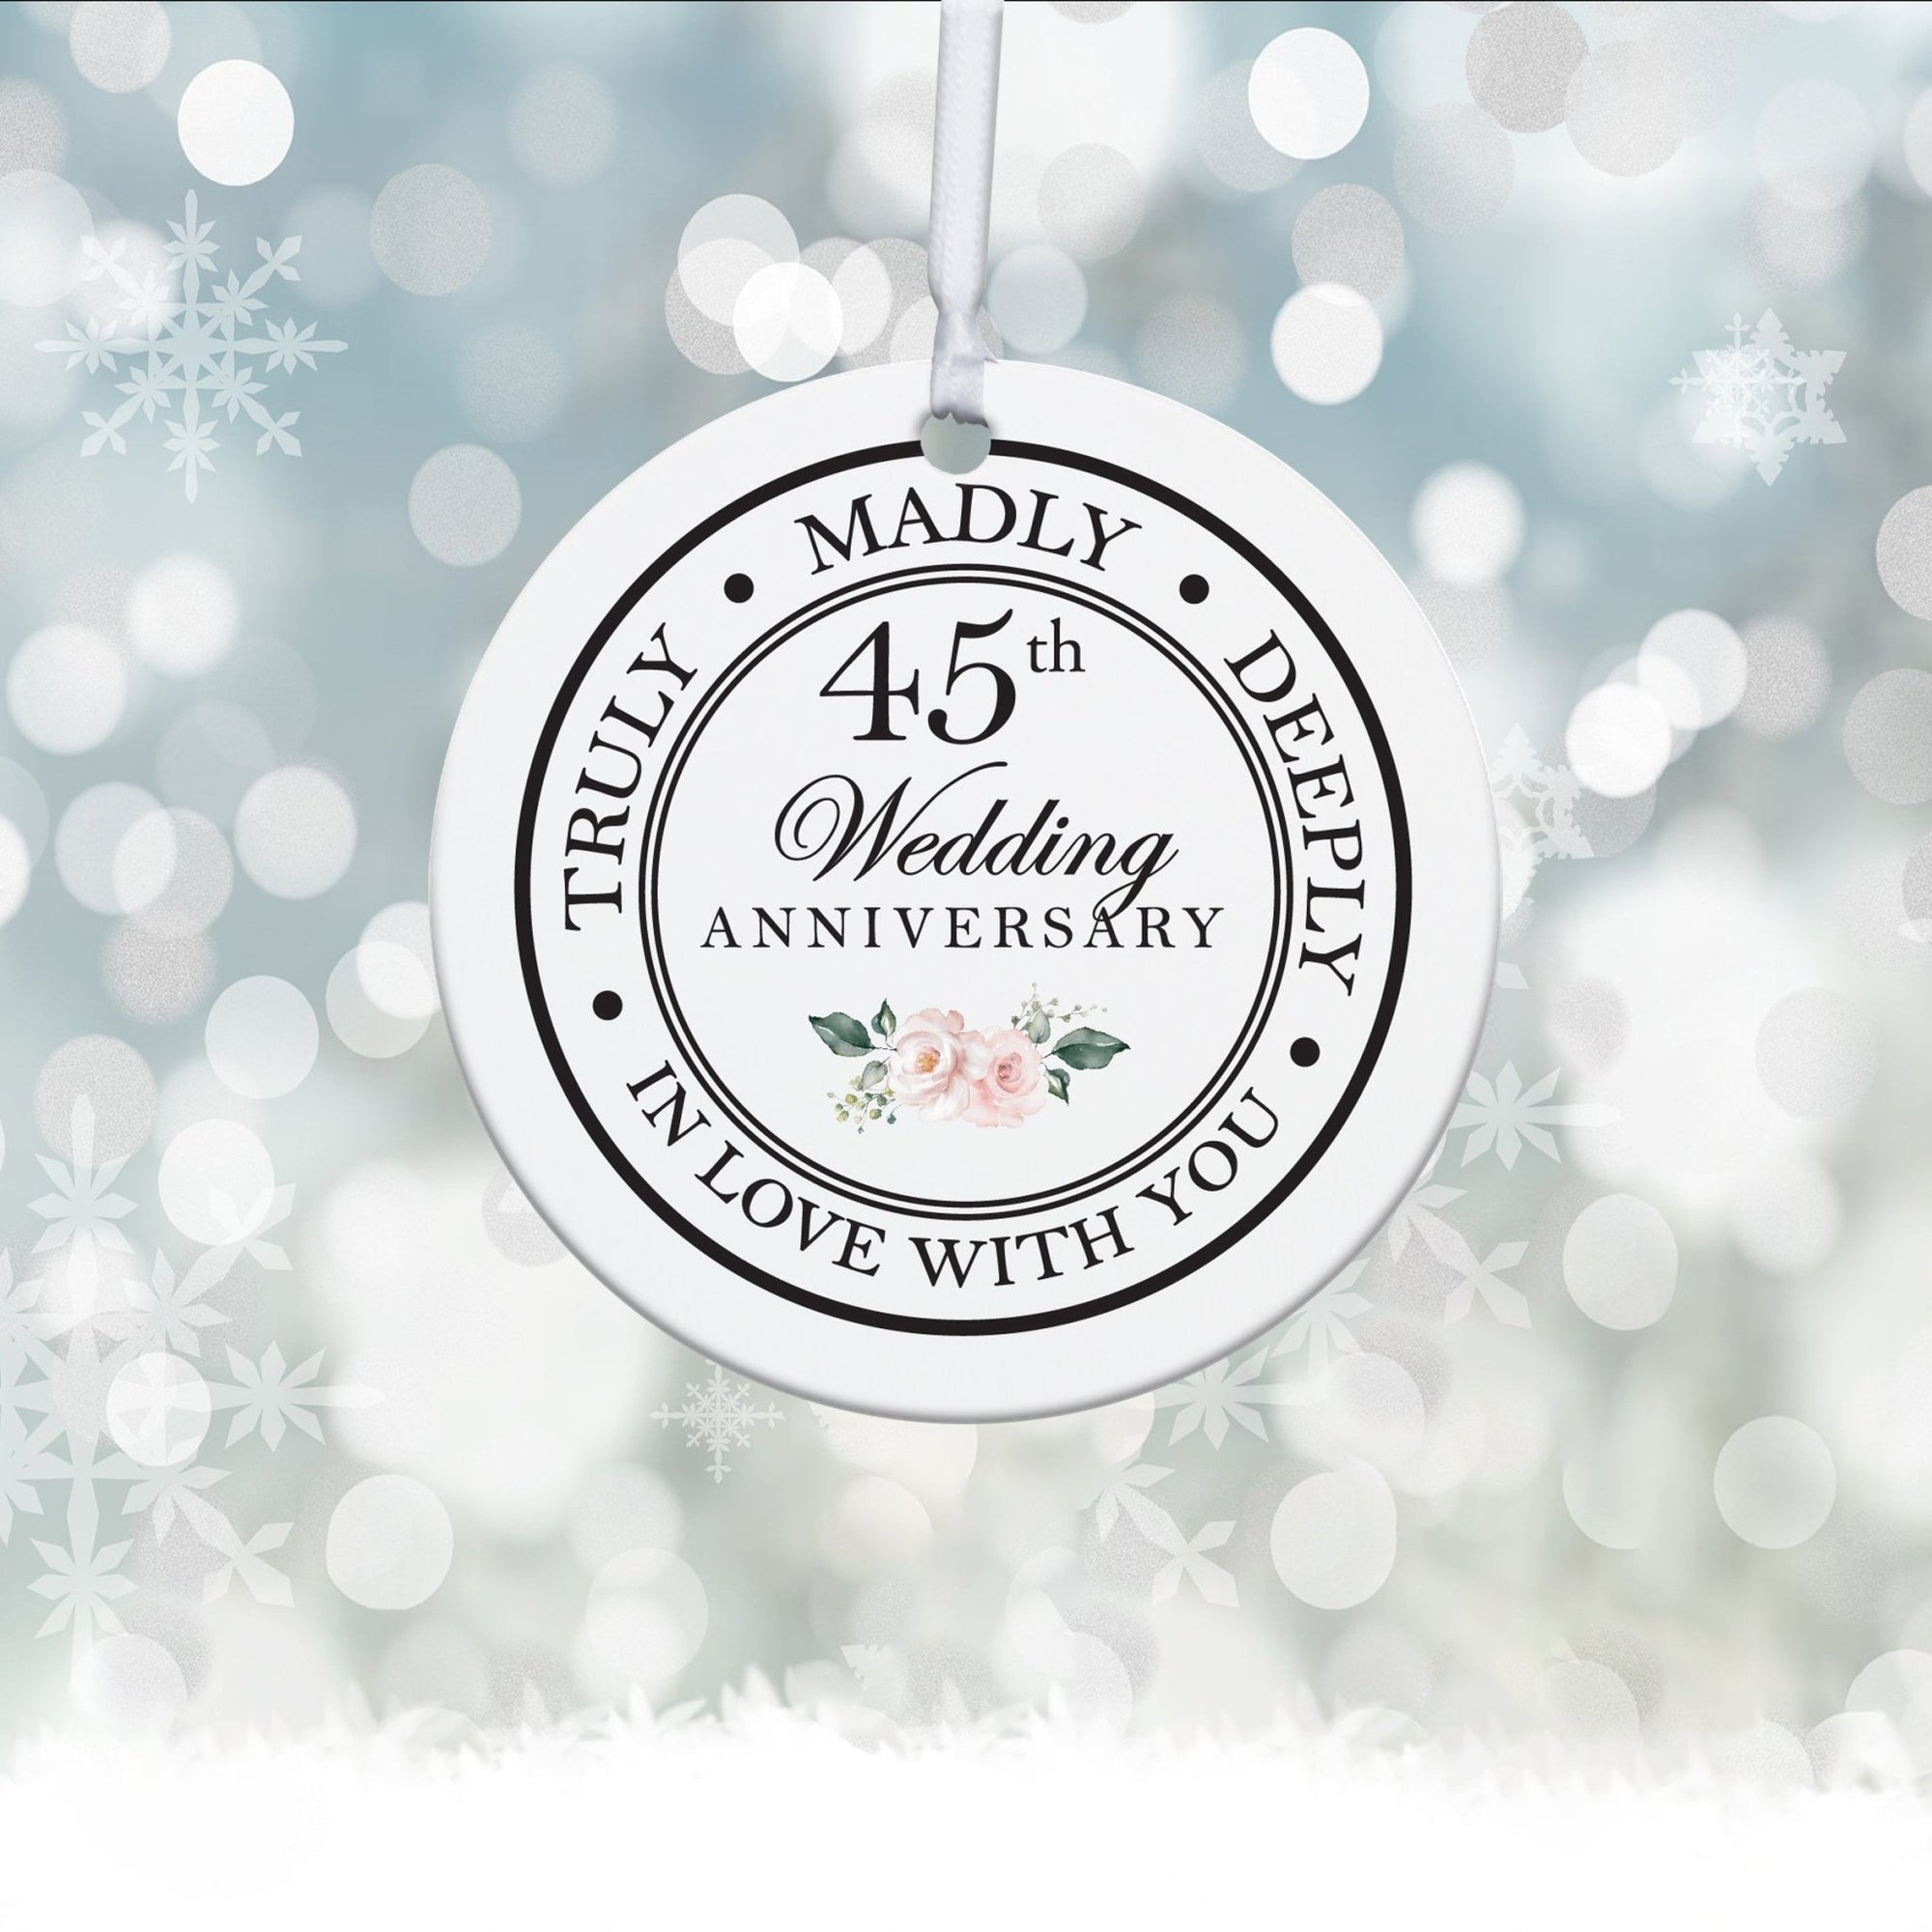 45th Wedding Anniversary White Ornament With Inspirational Message Gift Ideas - Truly, Madly, Deeply In Love With You - LifeSong Milestones